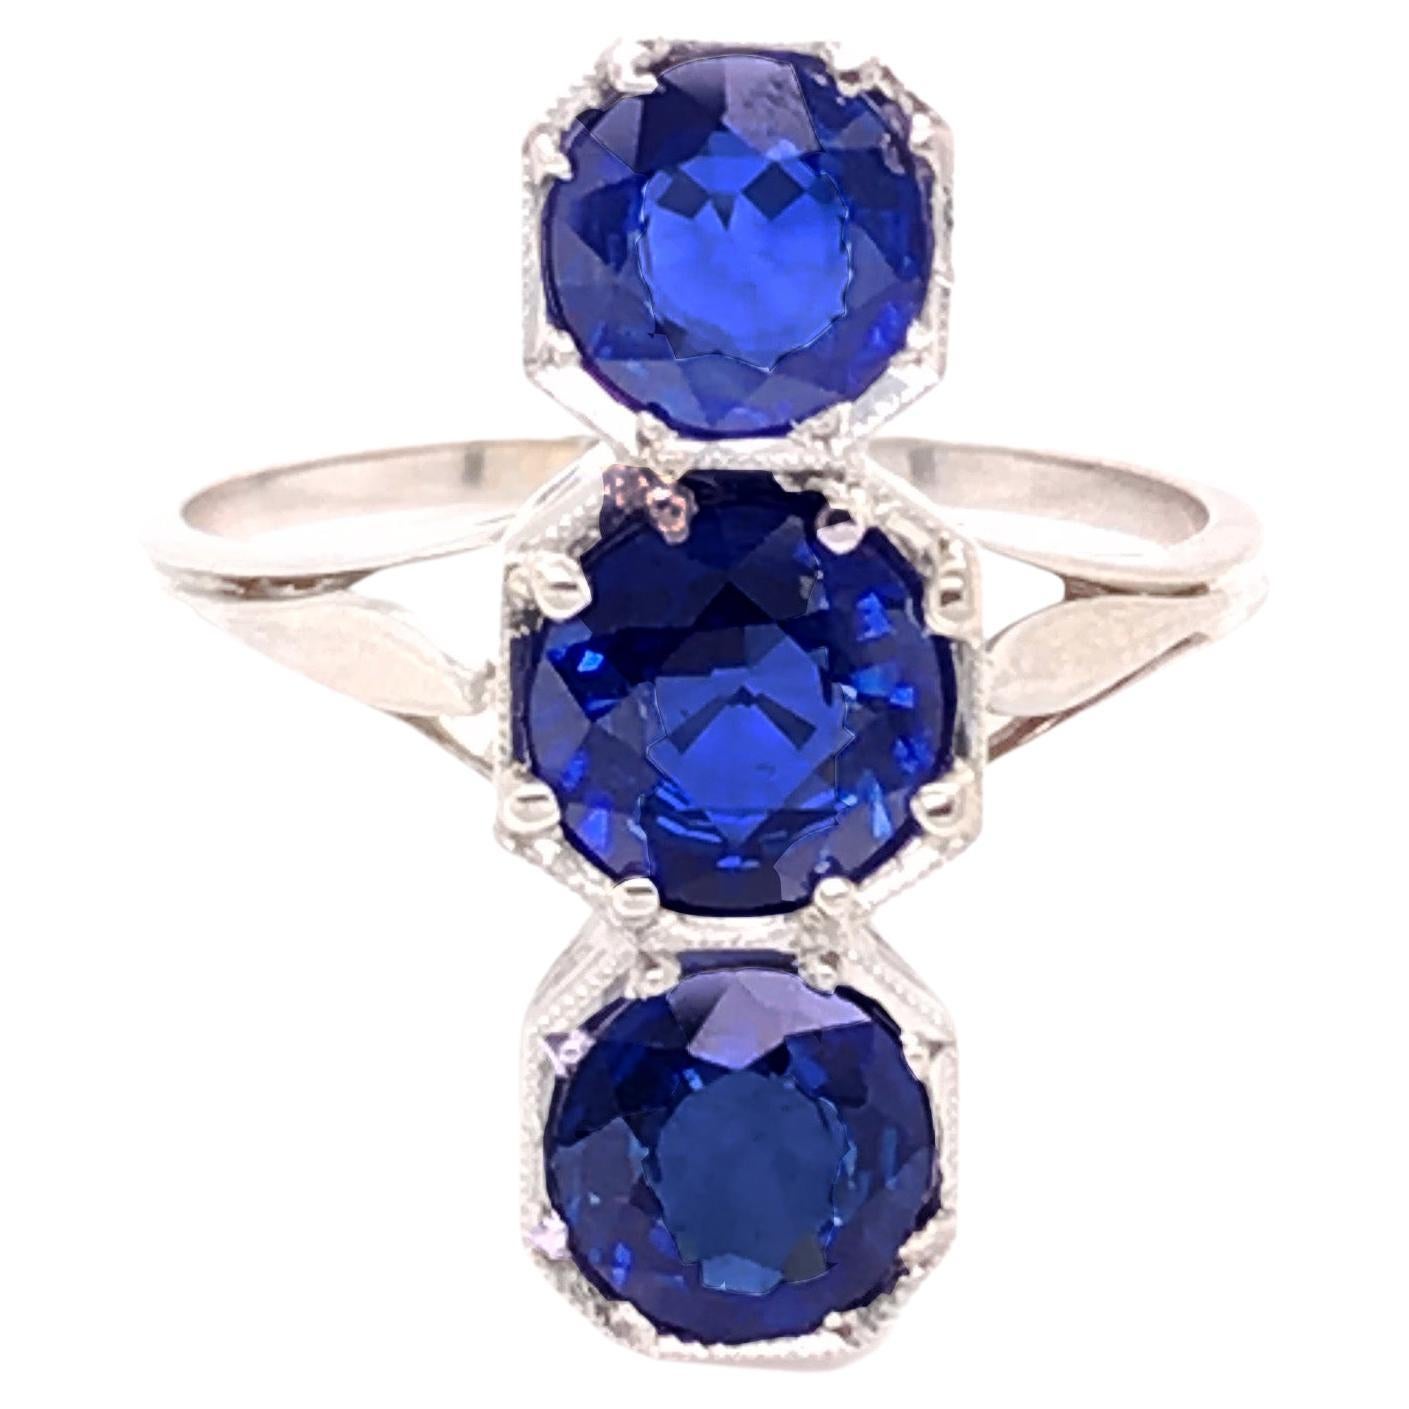 Edwardian 3 Stone Sapphire Ring 3.40ct Round Cut Genuine 1900's Antique 18K For Sale